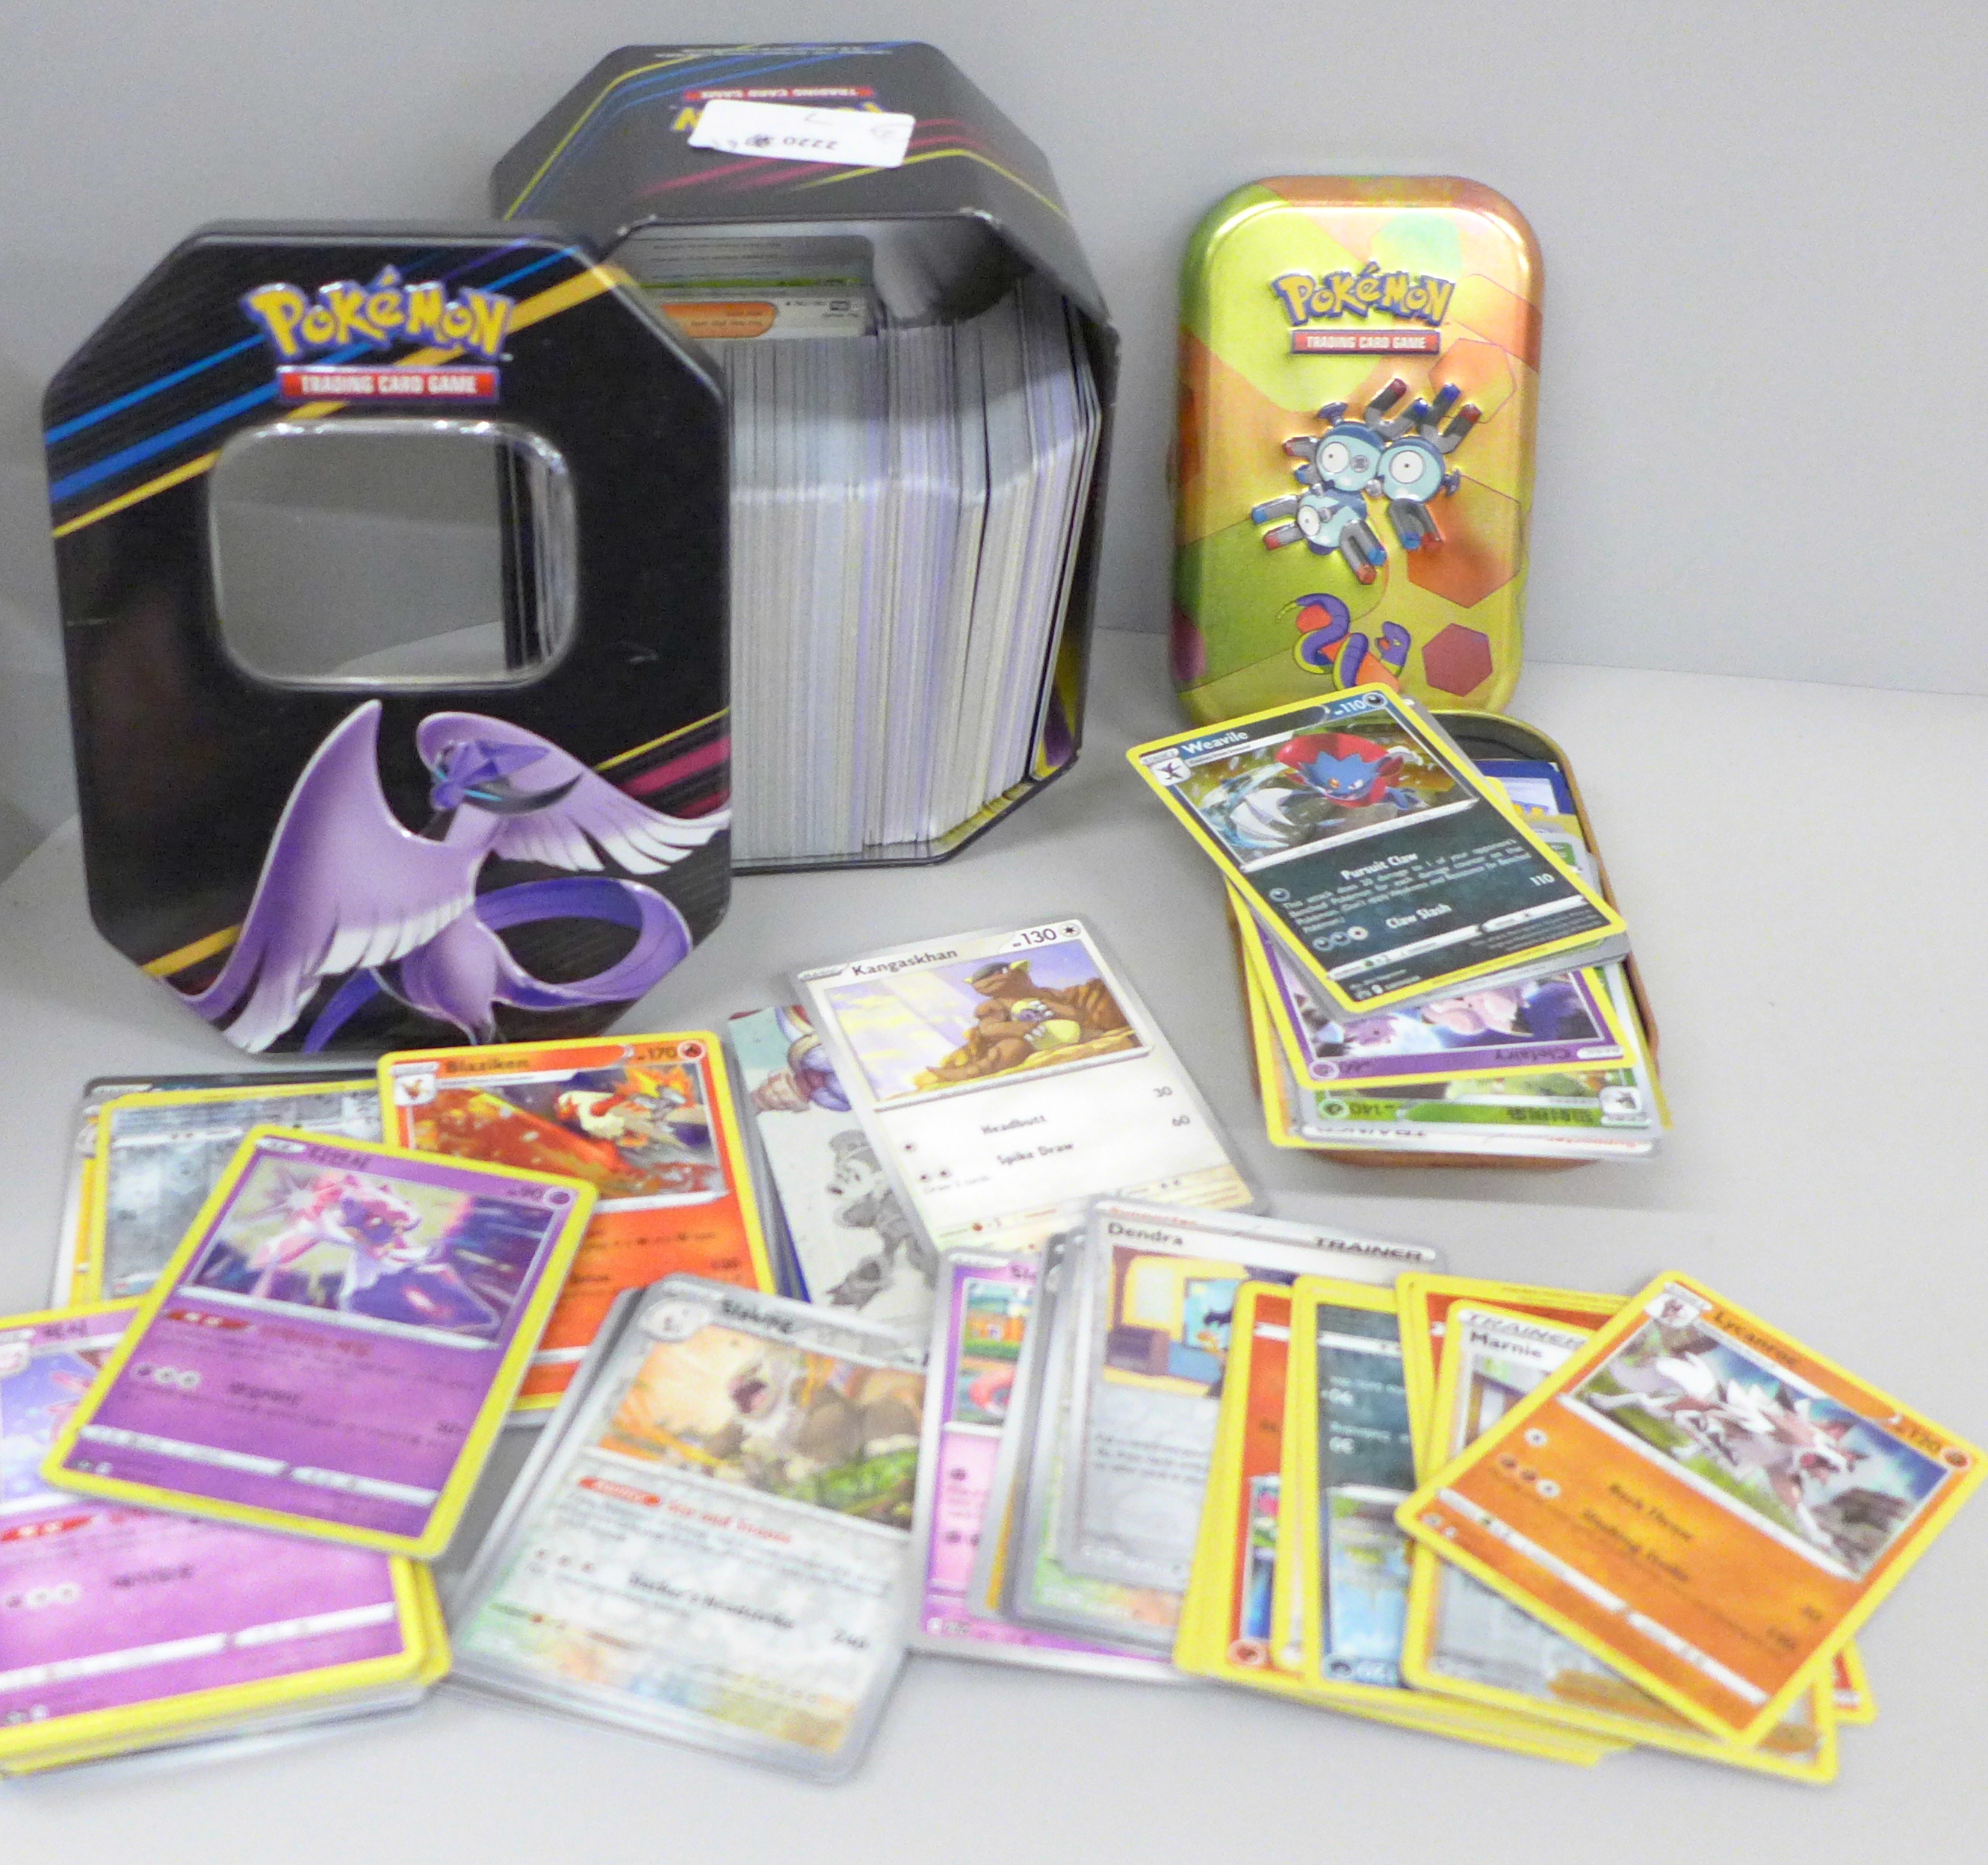 Two tins of Pokemon cards